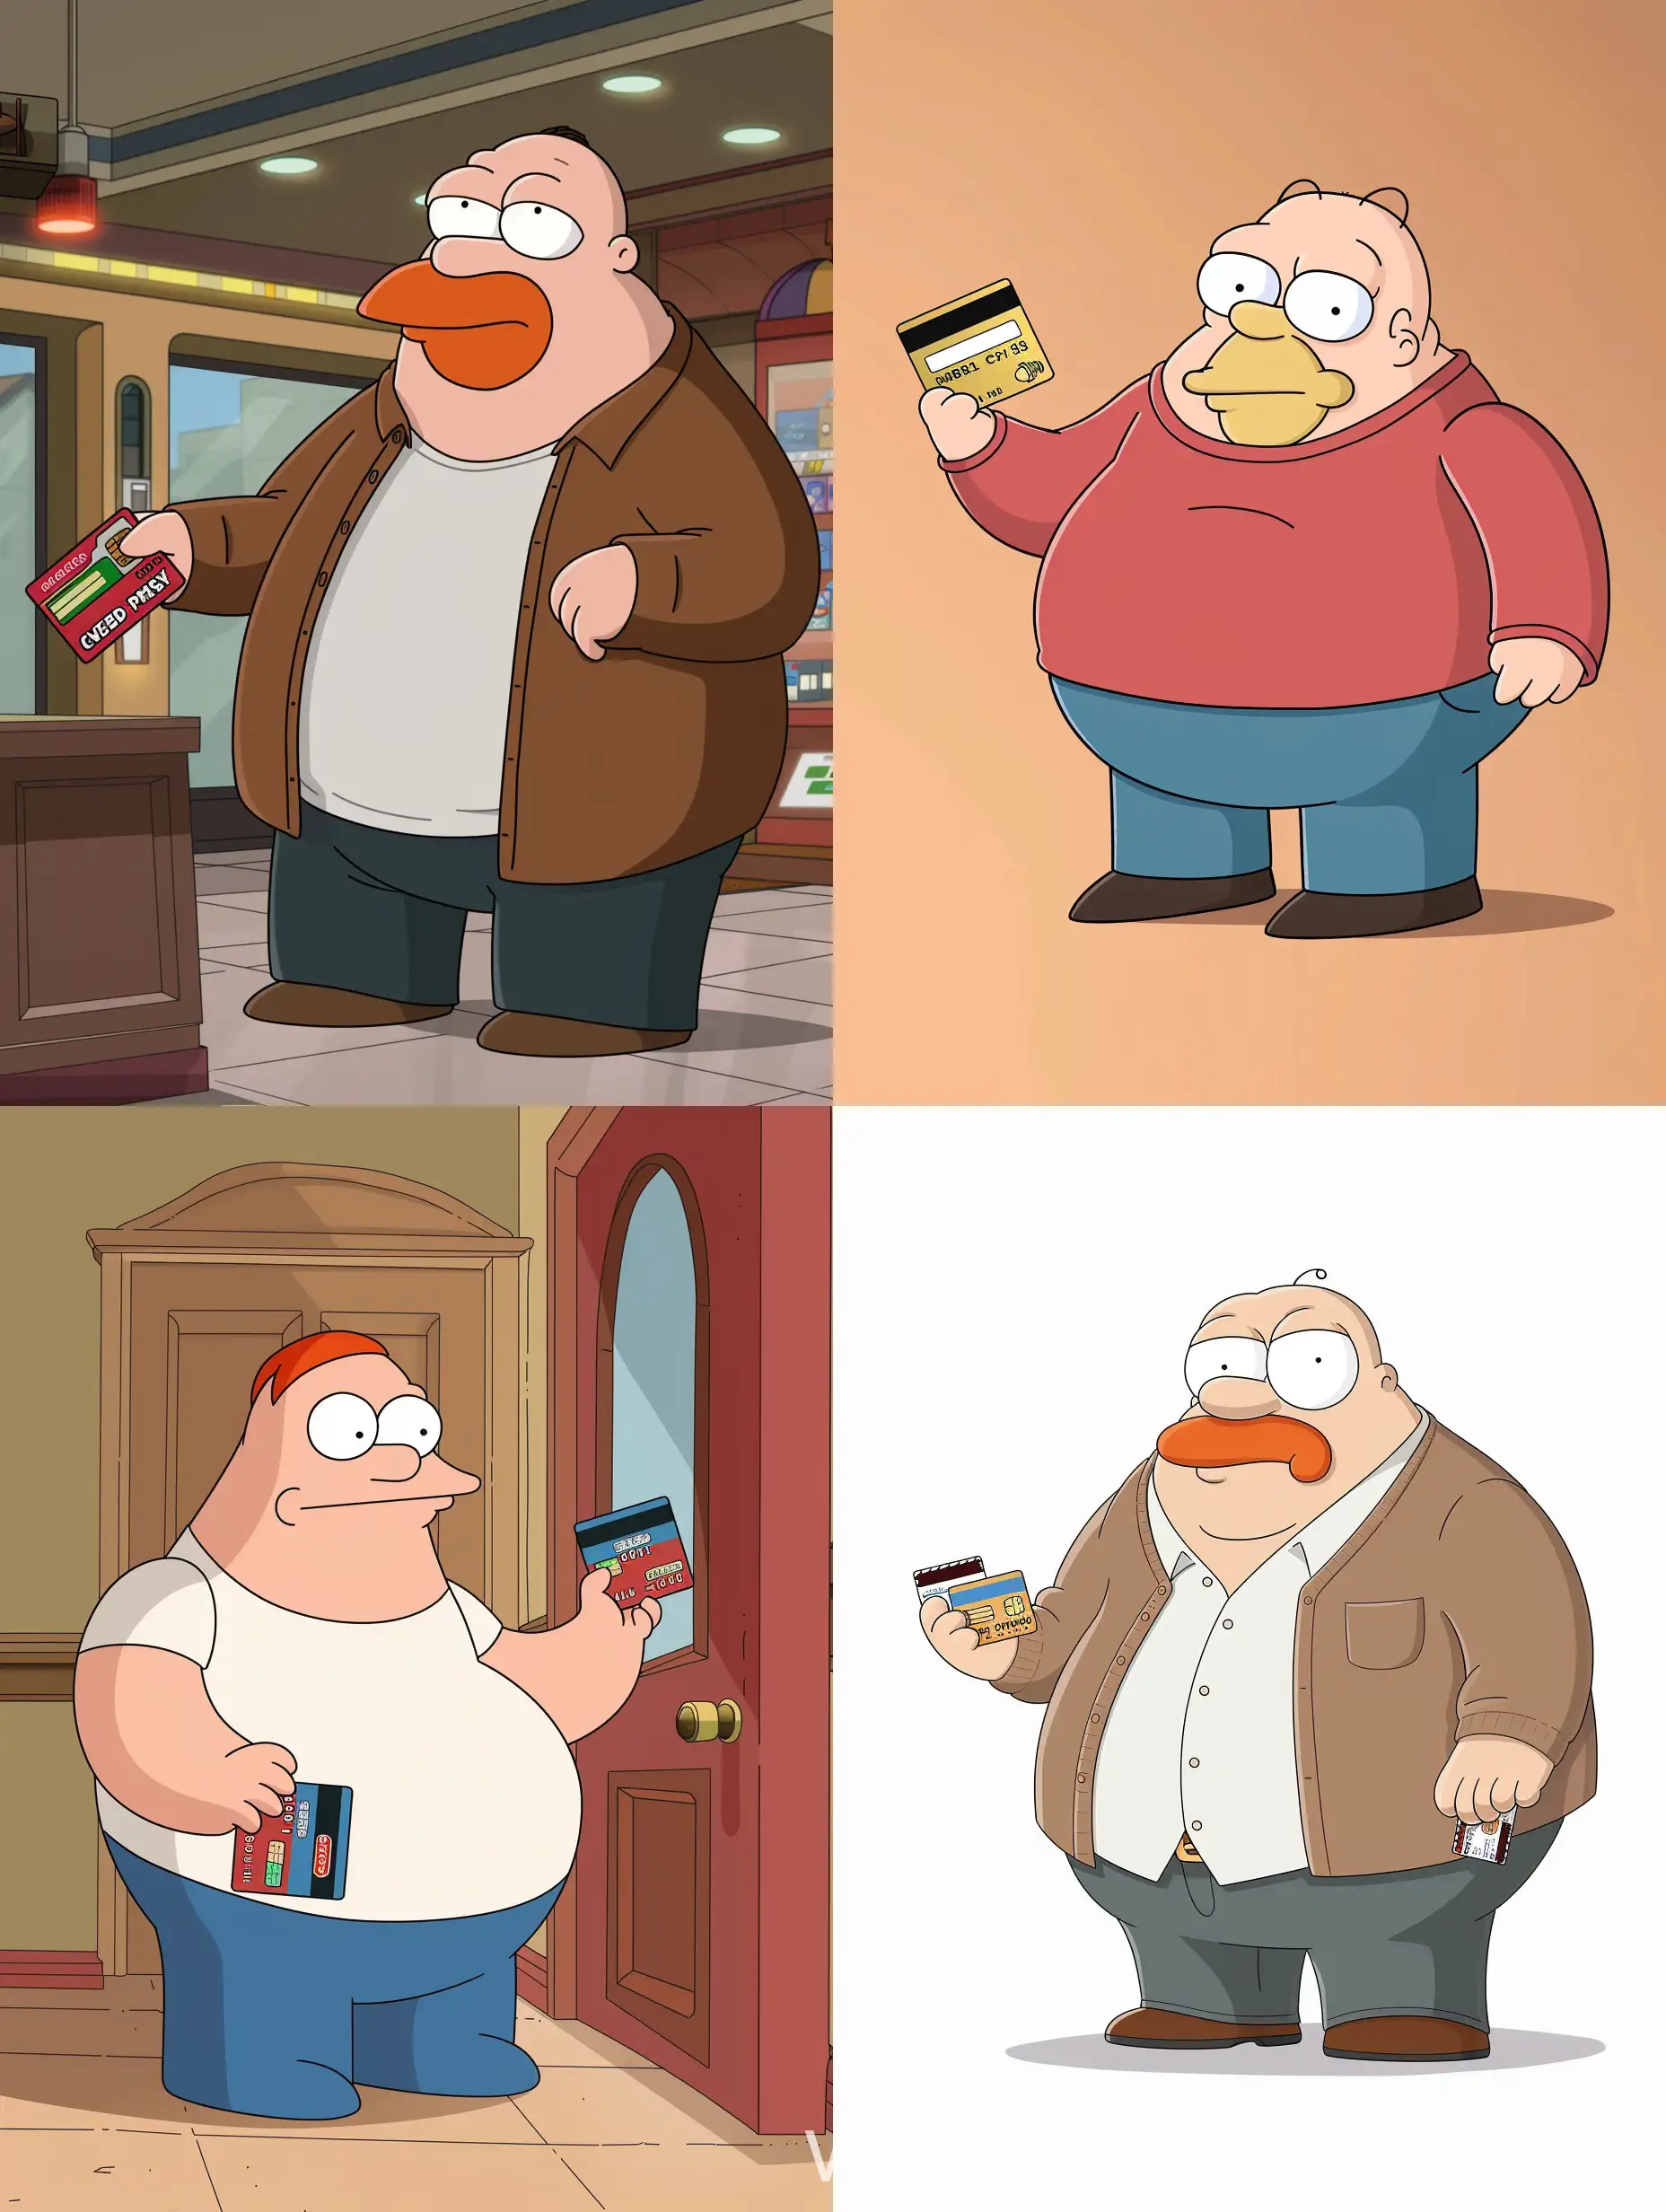 Family guy style, petter giffin with credit card debt